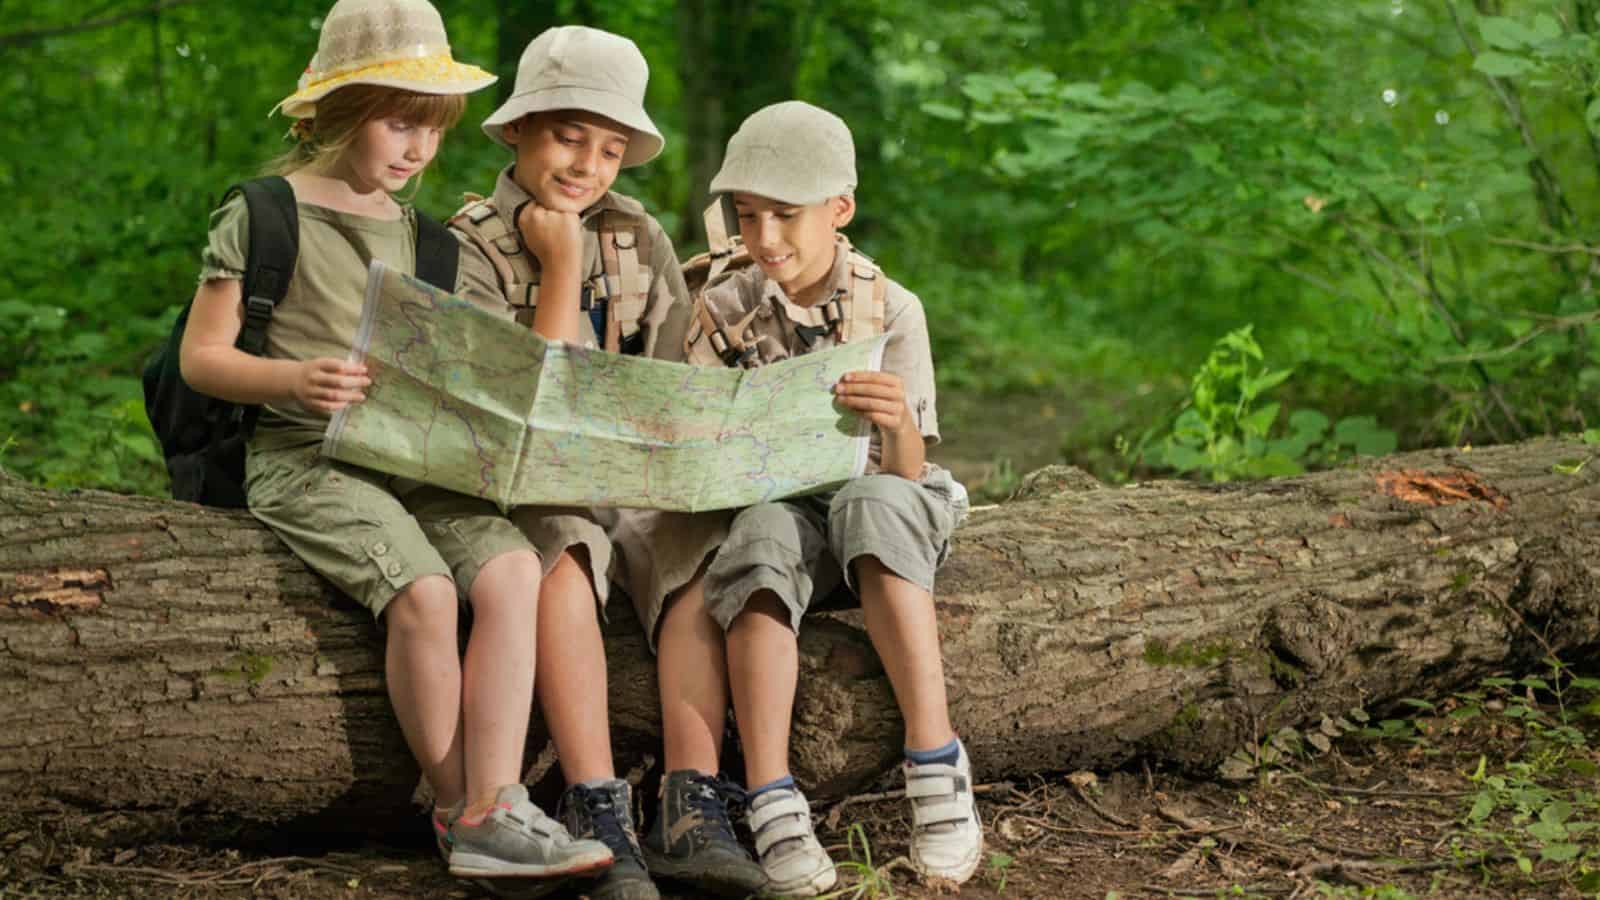 Summer camps,scout children camping and read map in forest